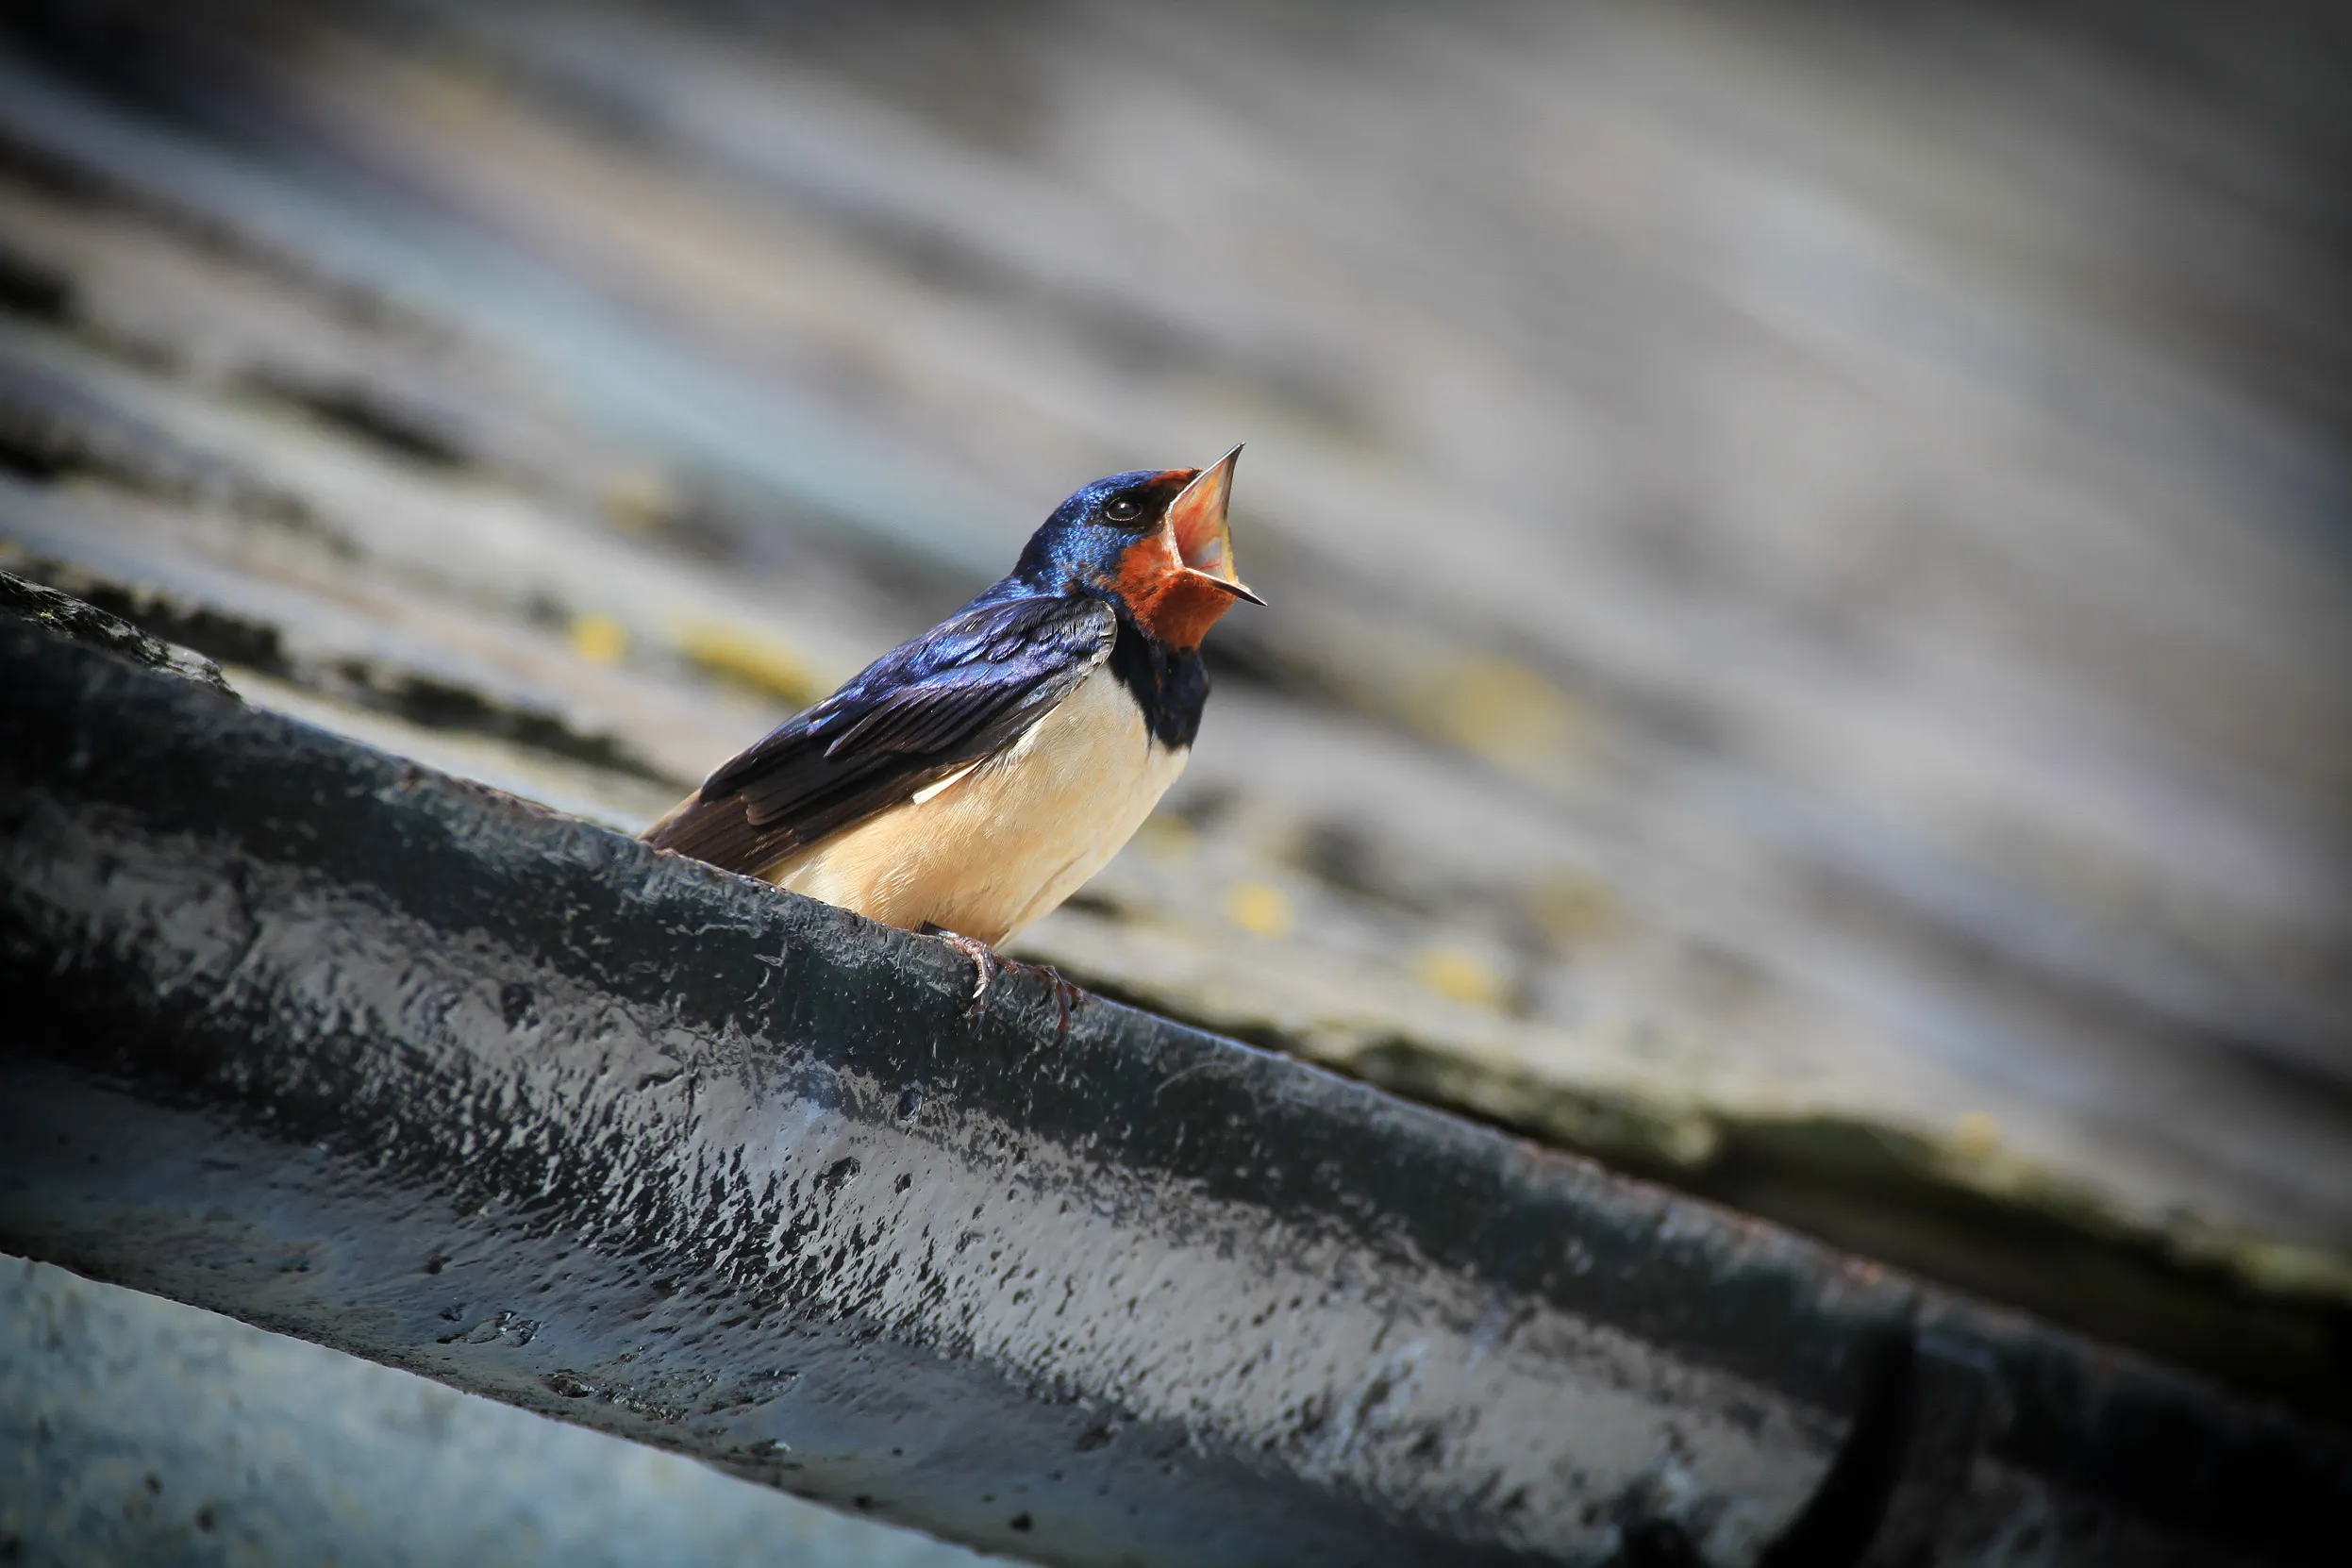 A lone Swallow sat in the guttering of a roof singing.